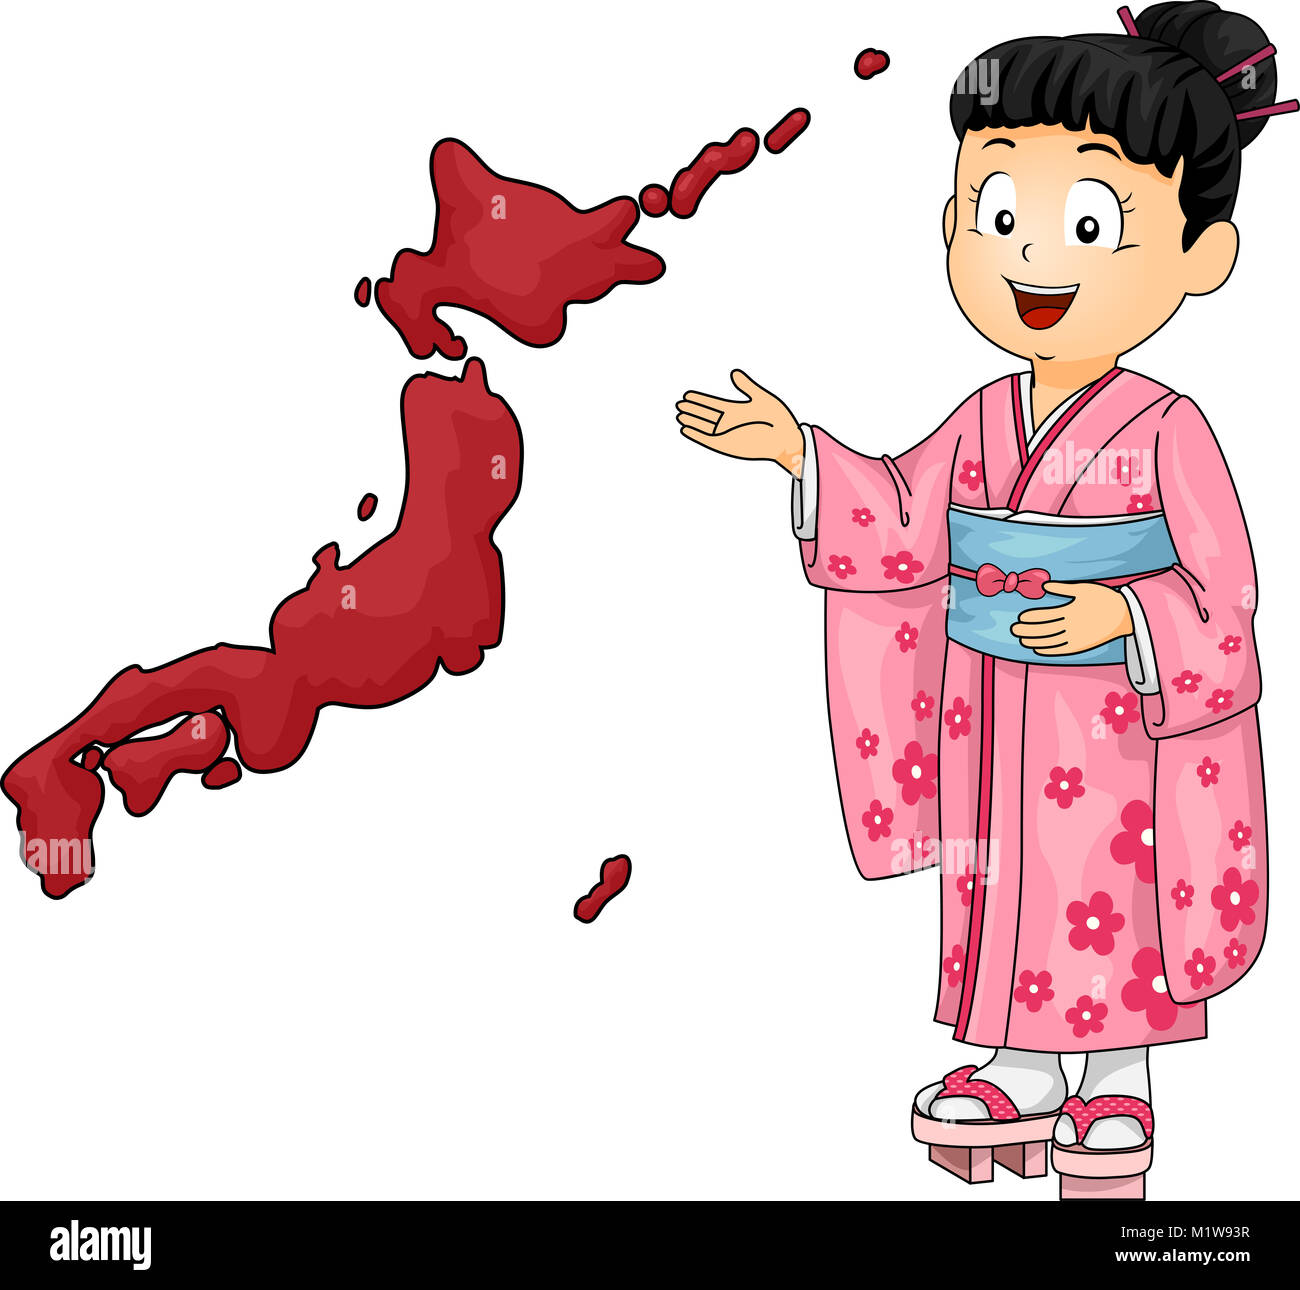 Illustration of a Kid Girl Wearing a Kimono, Japanese National Costume Presenting the Map of Japan Stock Photo